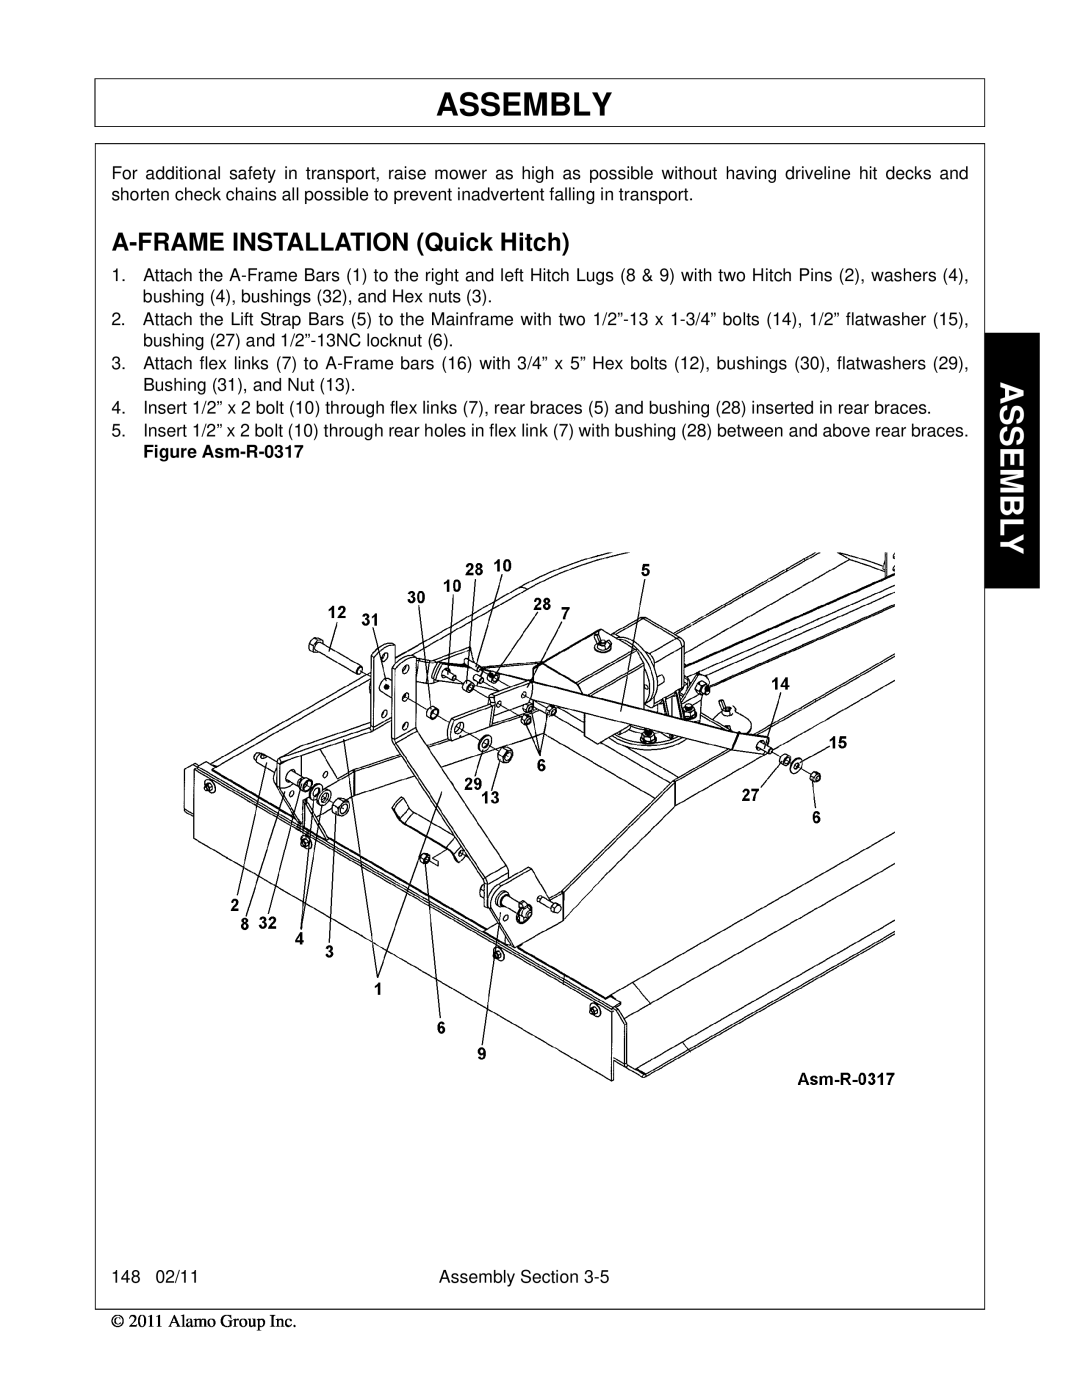 Rhino Mounts 148 manual A-FRAME INSTALLATION Quick Hitch, Assembly, Figure Asm-R-0317 